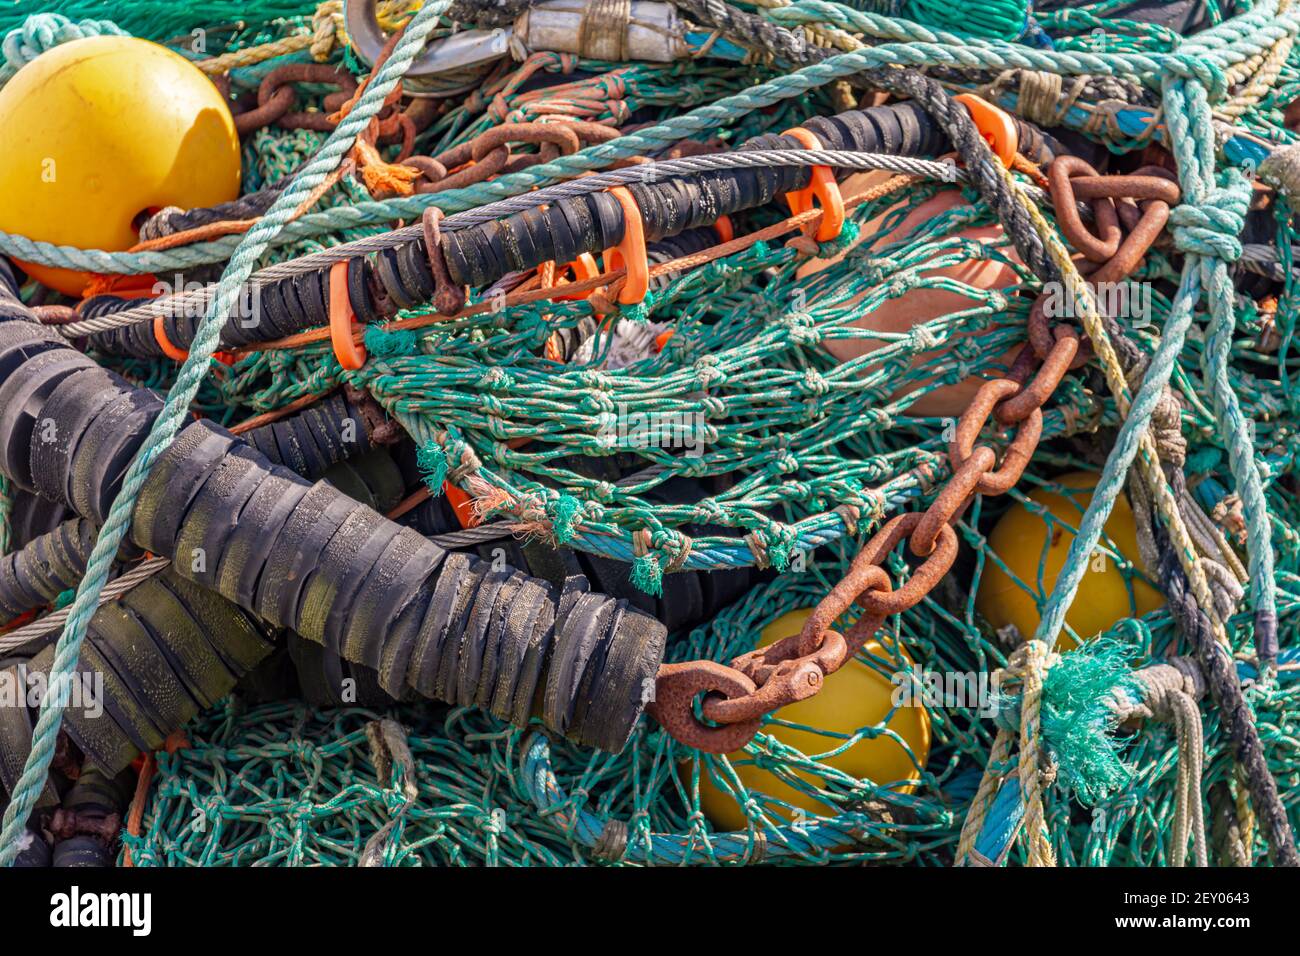 close up image of fishing nets, chains, lines and gear, star island, Montauk, NY Stock Photo